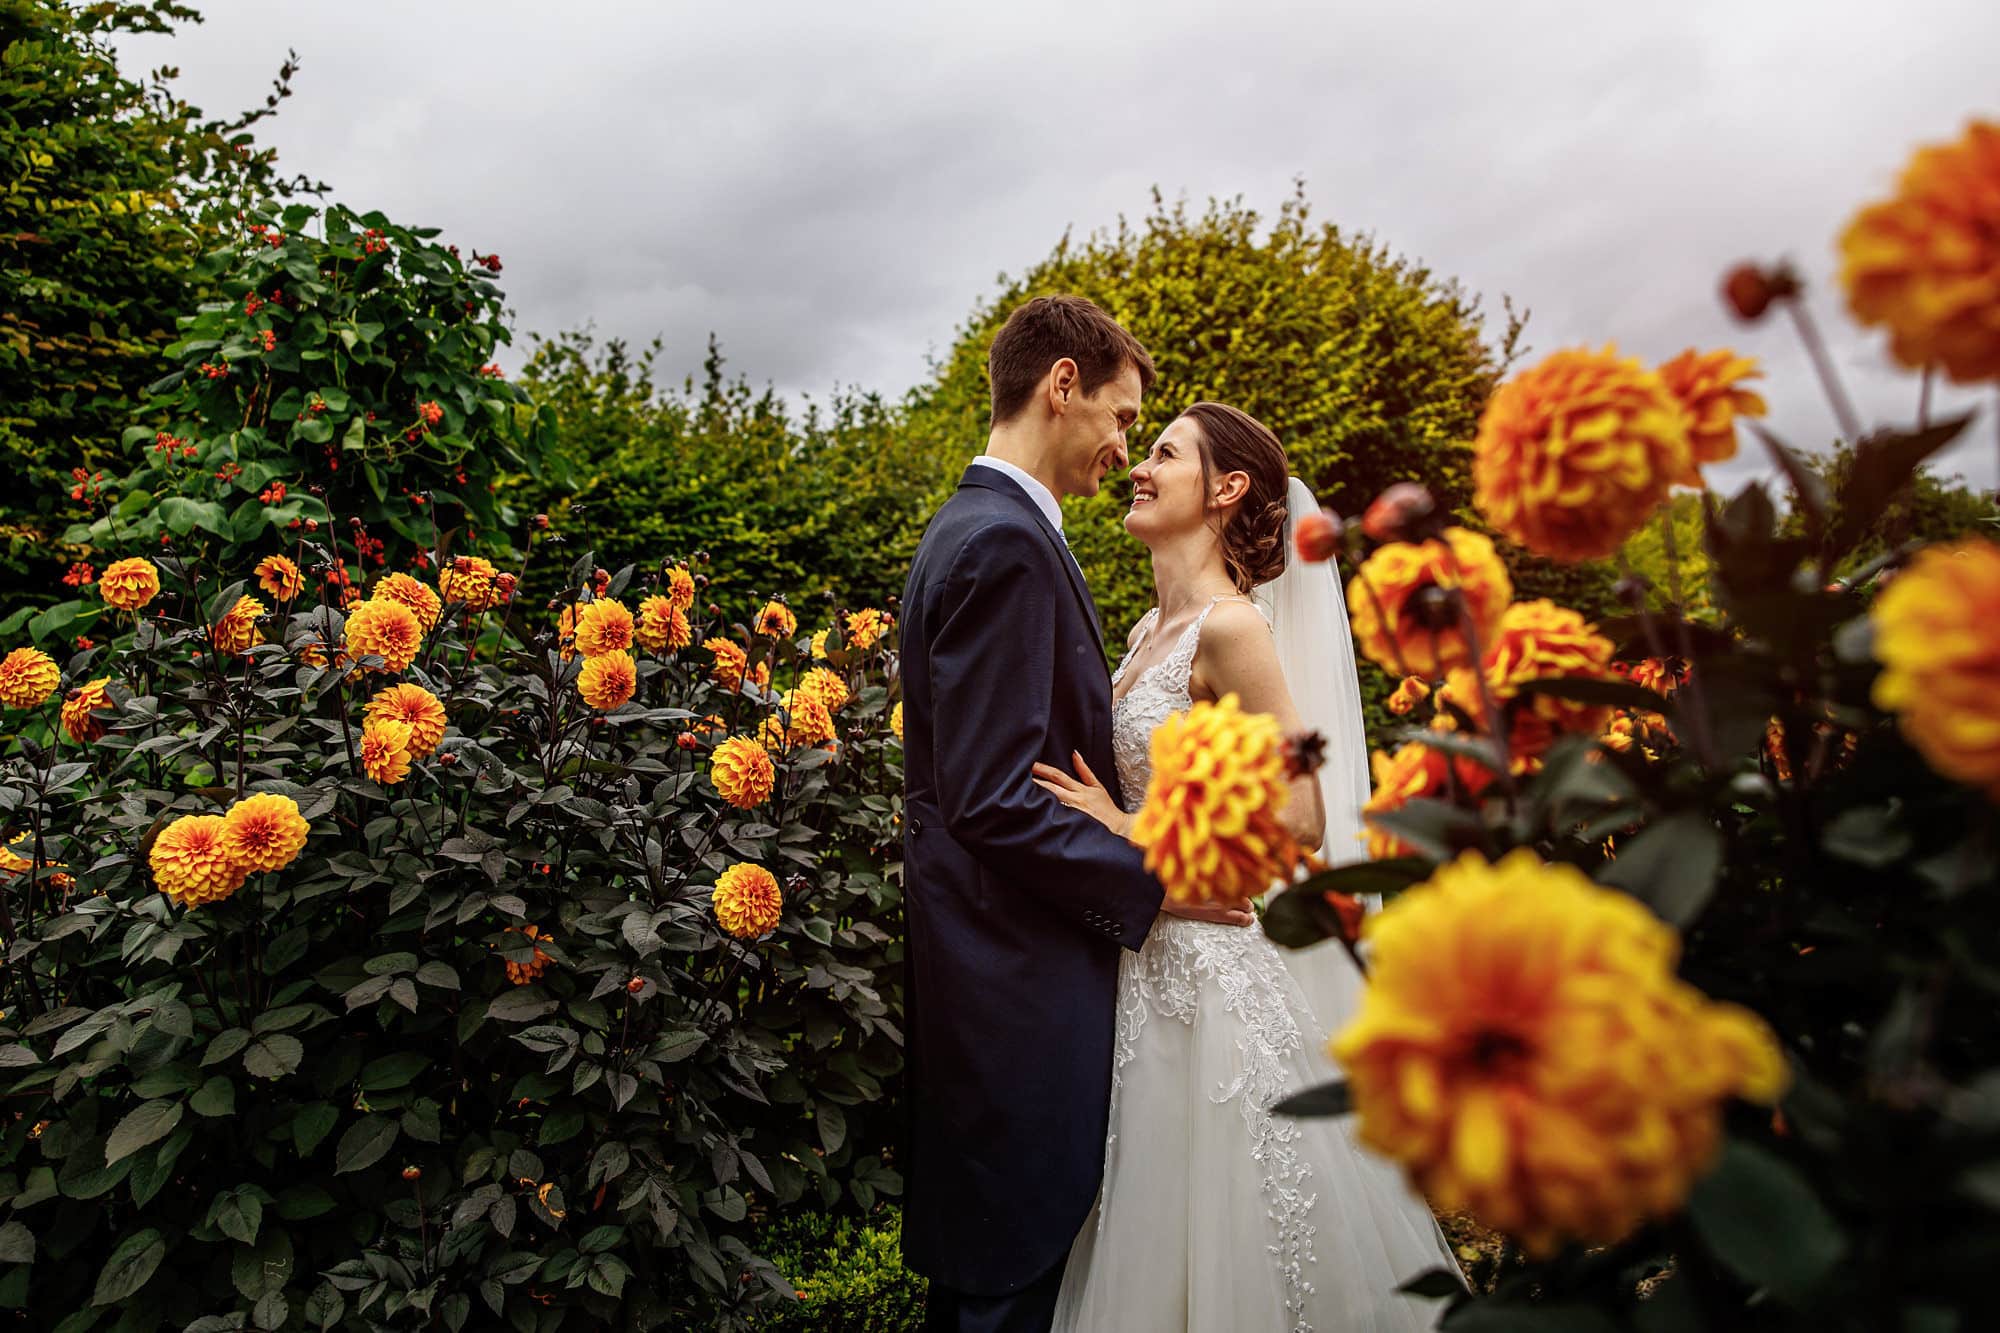 Bride and groom on wedding day surrounded by orange Dahlias in garden